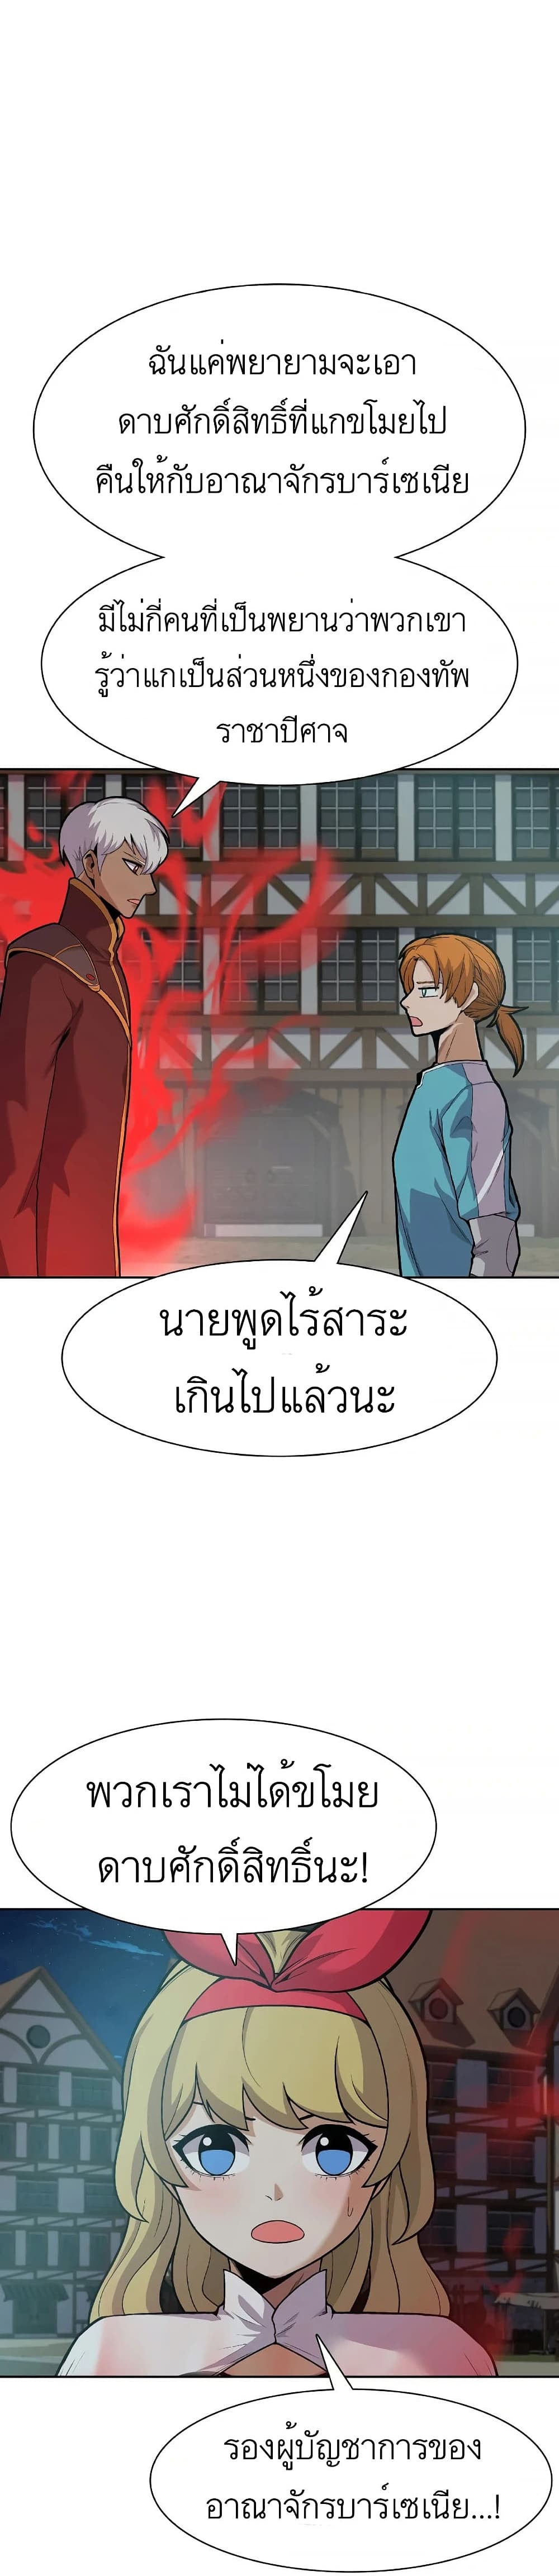 Raising Newbie Heroes In Another World ตอนที่ 14 (21)